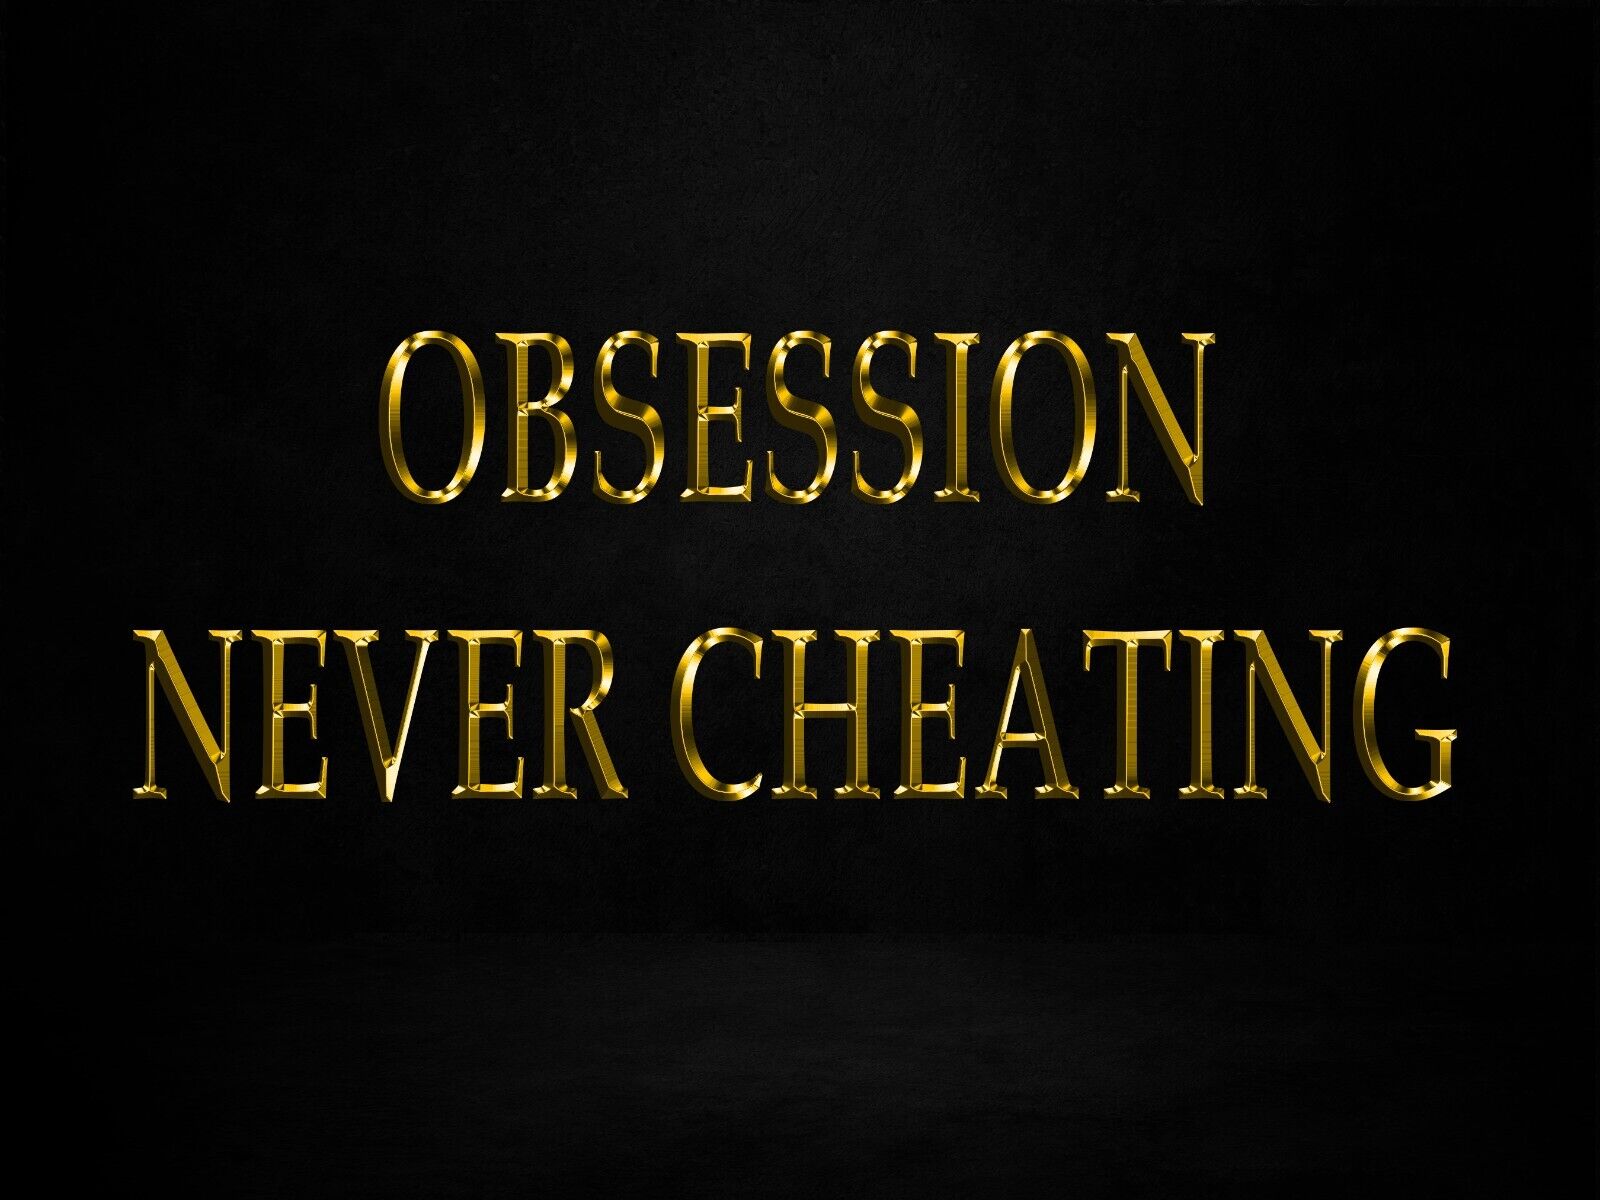 Obsession Never Cheating Stop cheating spell